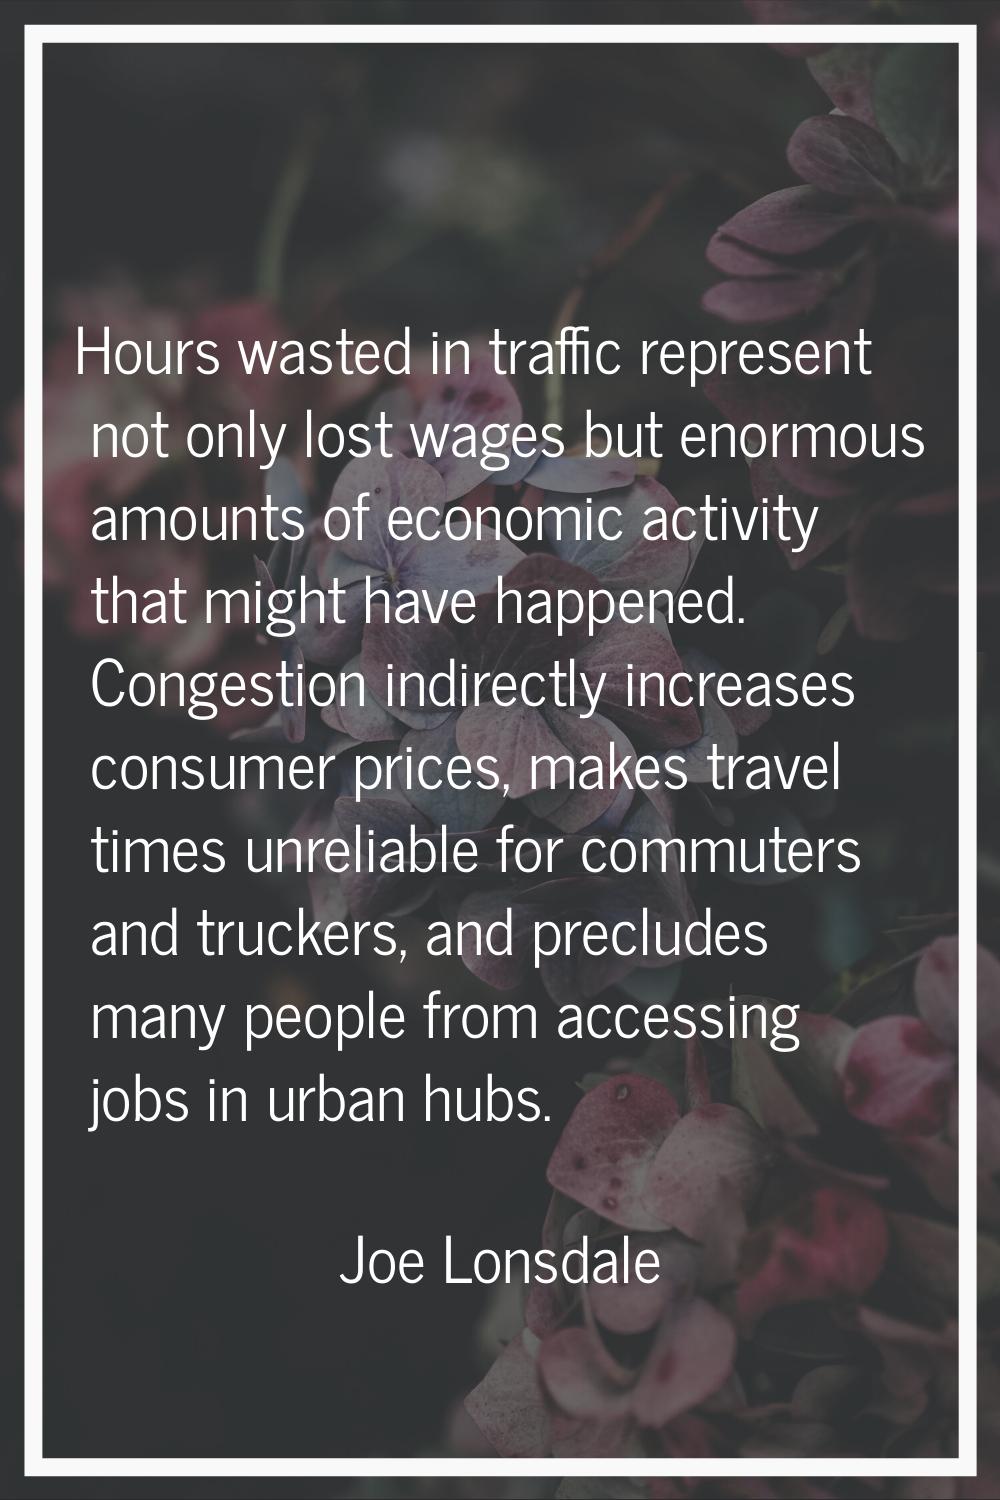 Hours wasted in traffic represent not only lost wages but enormous amounts of economic activity tha